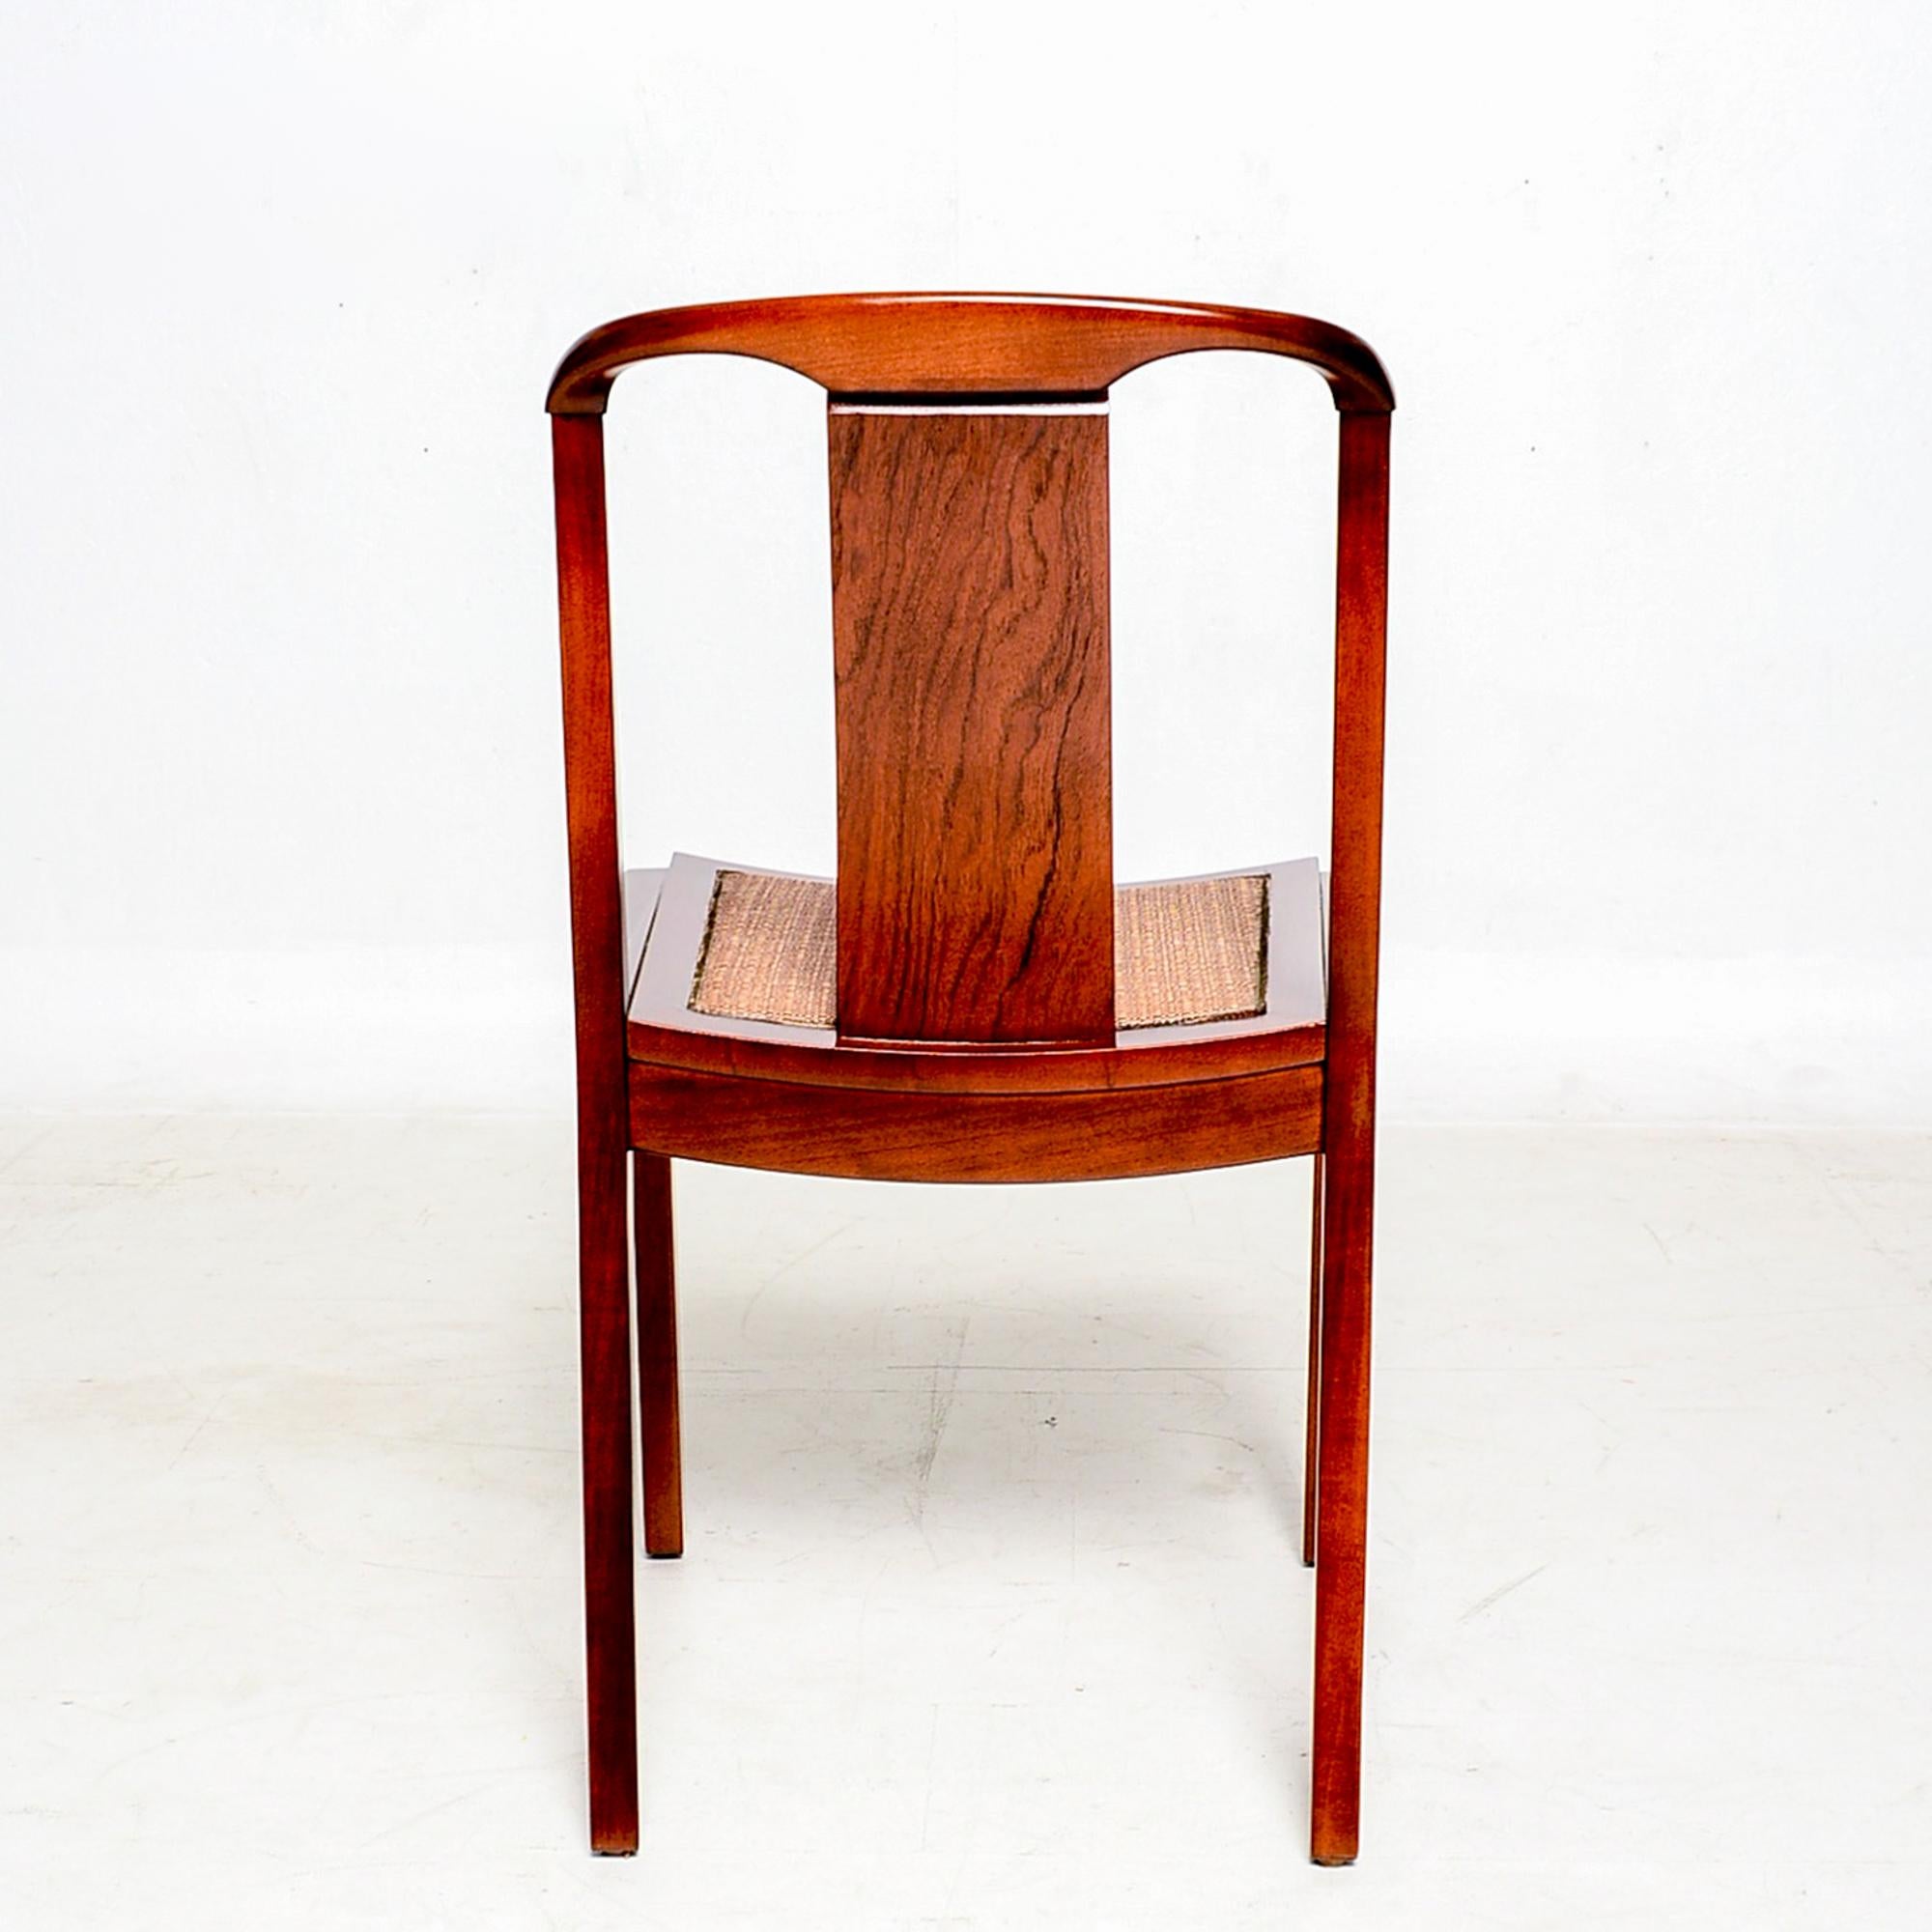 Mid-20th Century Sophisticated Baker Sculptural Walnut Wood Dining Chairs by Michael Taylor 1950s